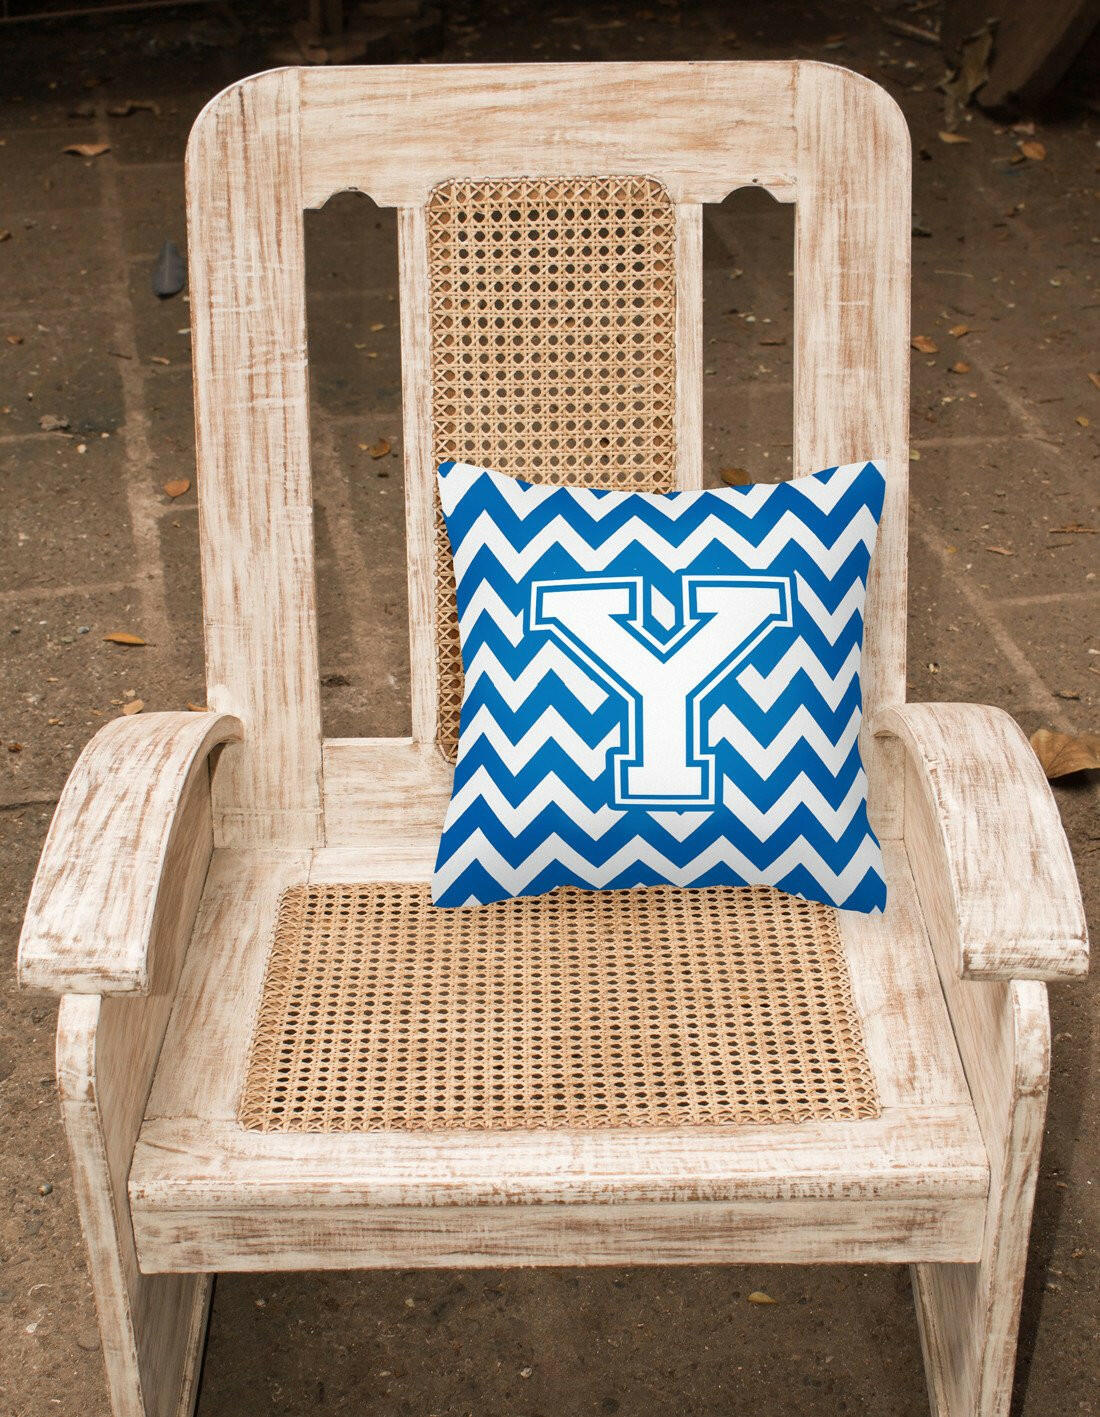 Letter Y Chevron Blue and White Fabric Decorative Pillow CJ1045-YPW1414 by Caroline's Treasures